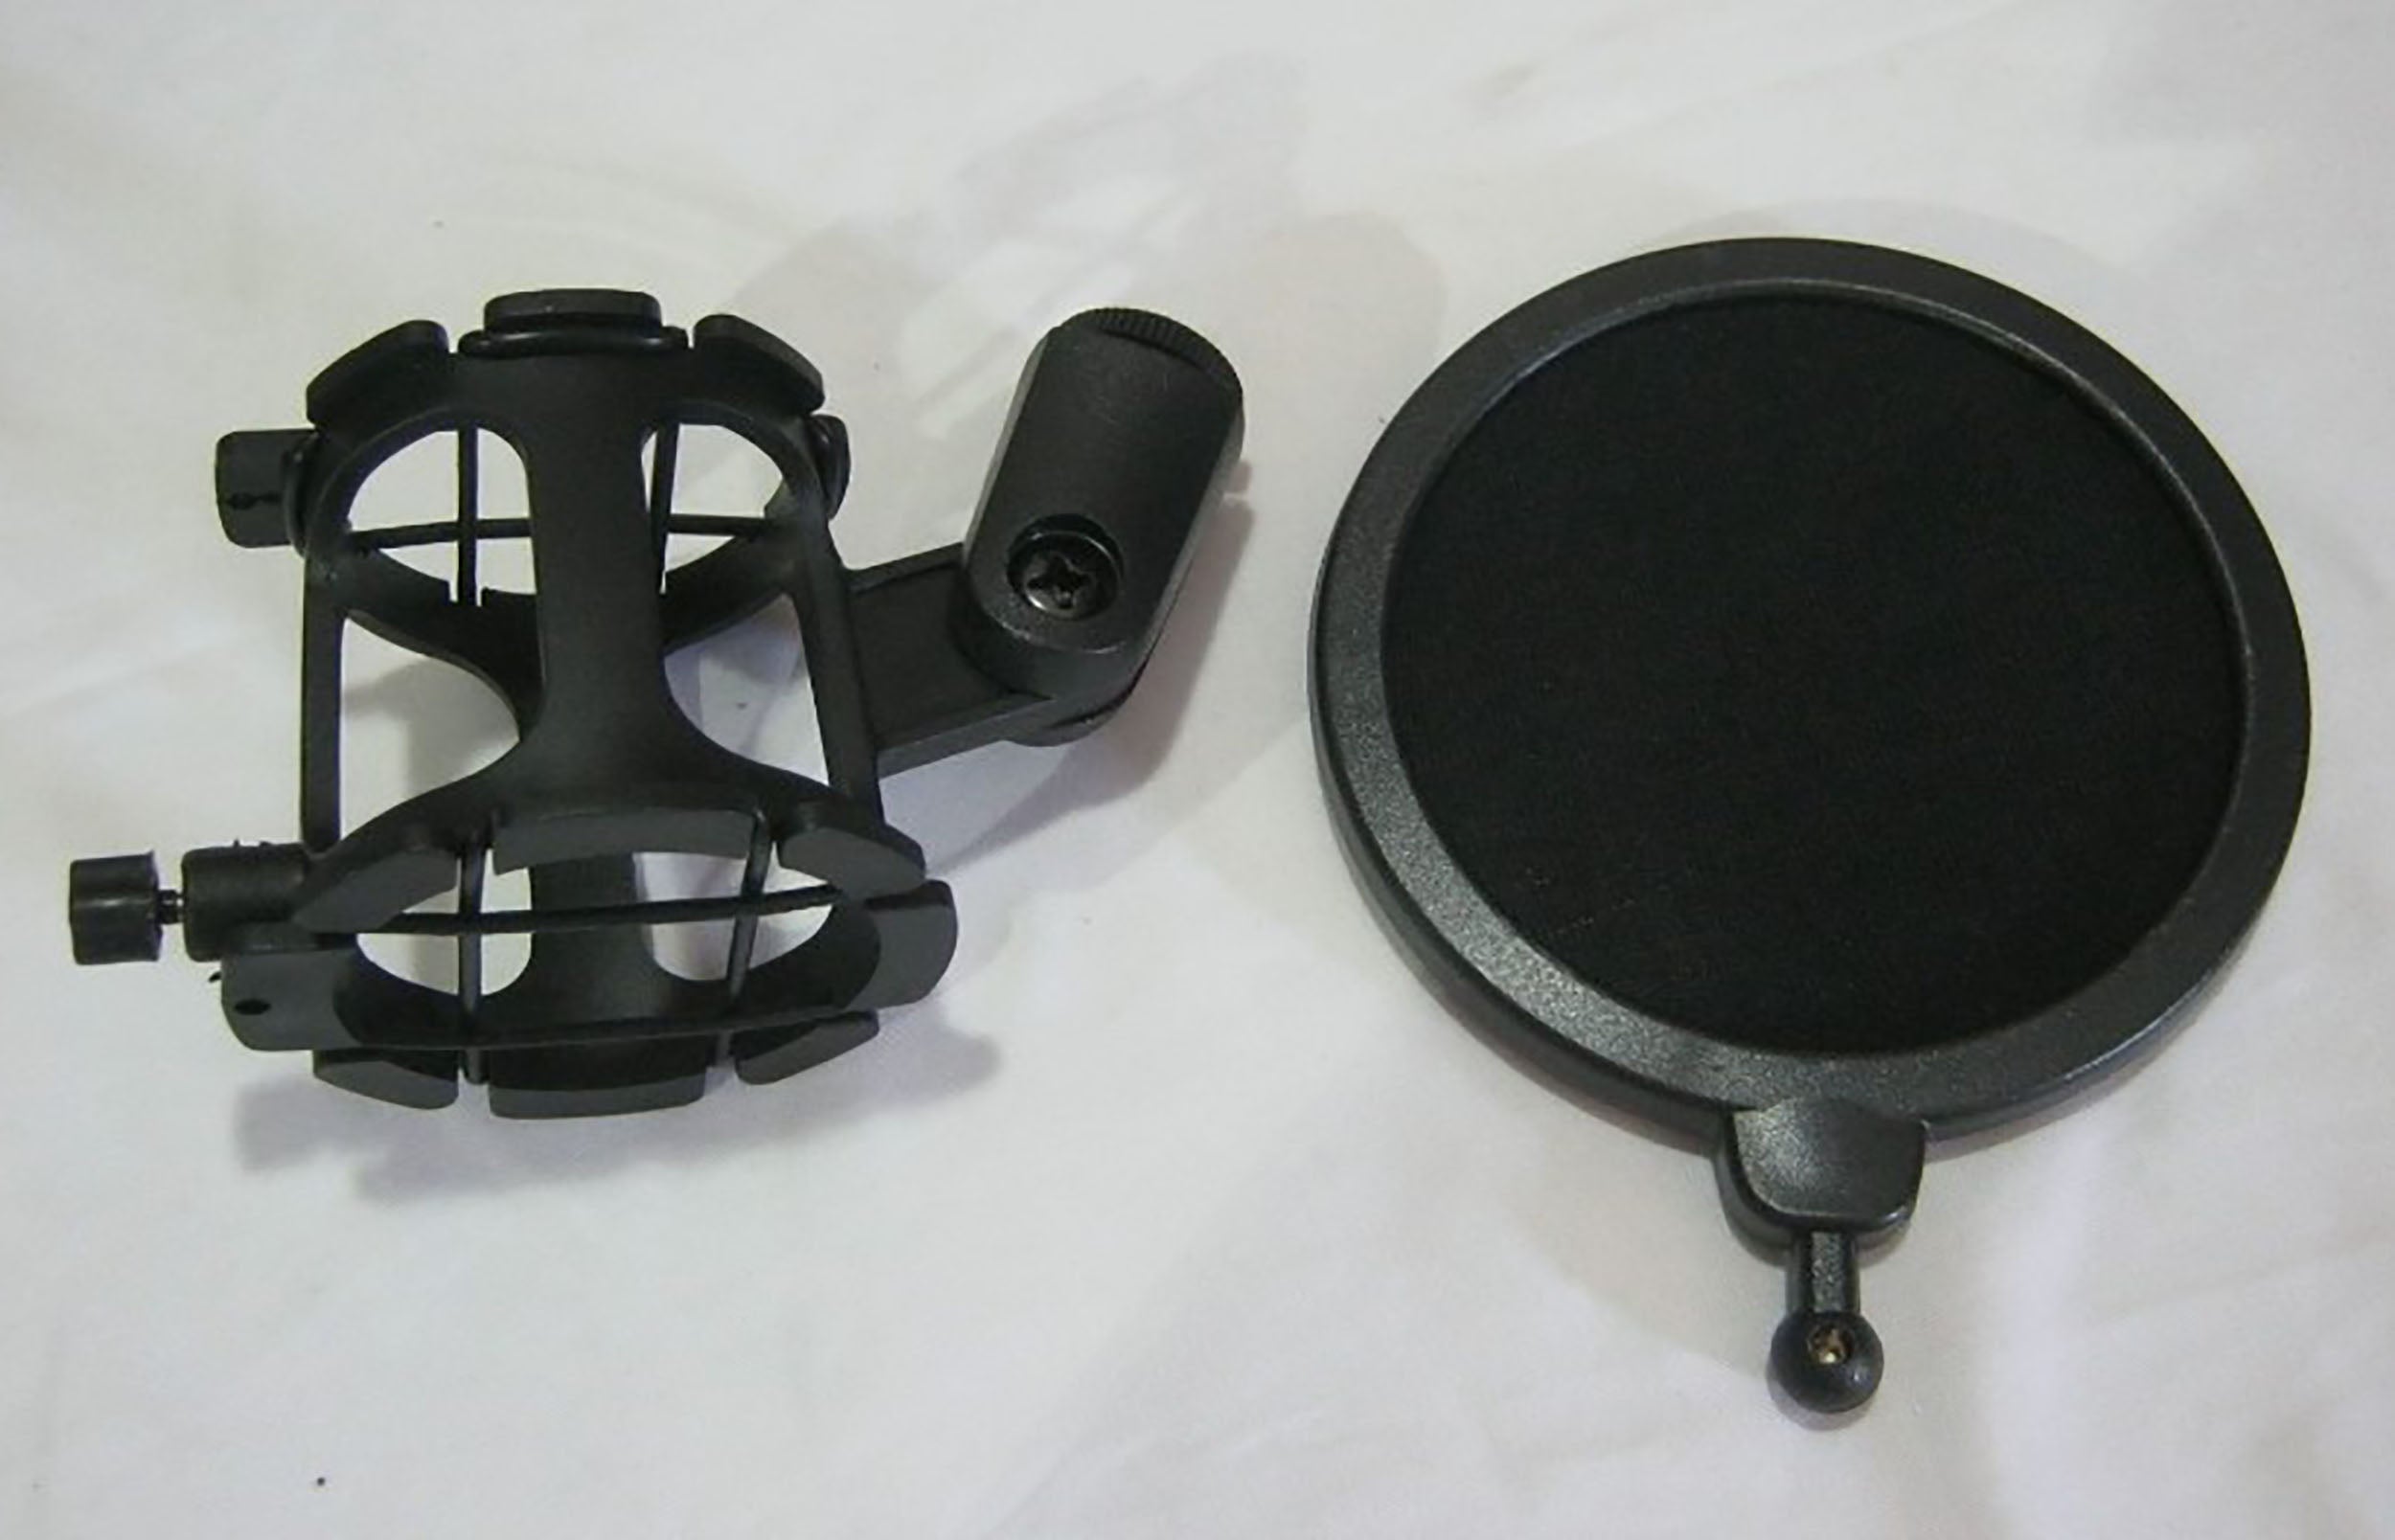 Technical Pro MKPS1 Shock Mount Microphone Holder with adjustable Pop Filter by Technical Pro